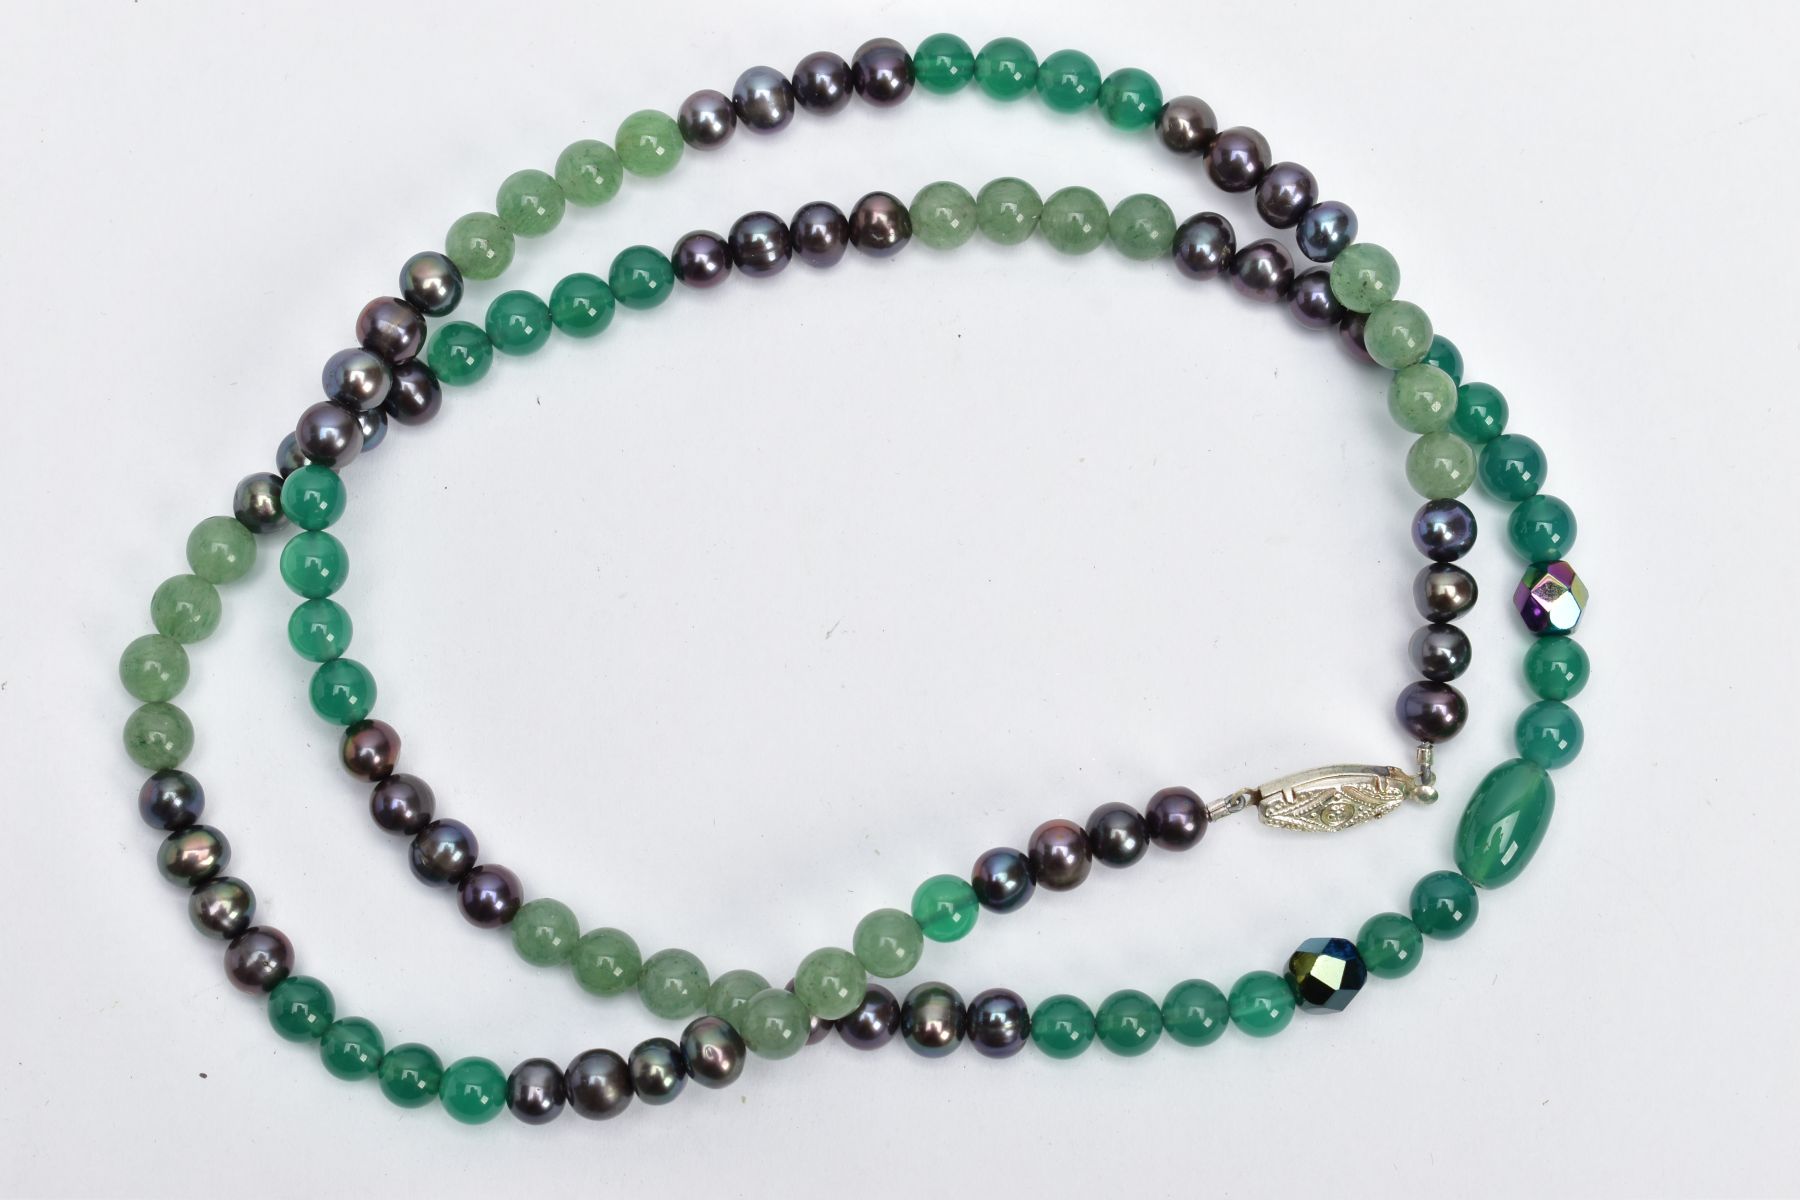 A GEM BEAD NECKLACE, the single row of near uniform mainly spherical beads comprising dyed green